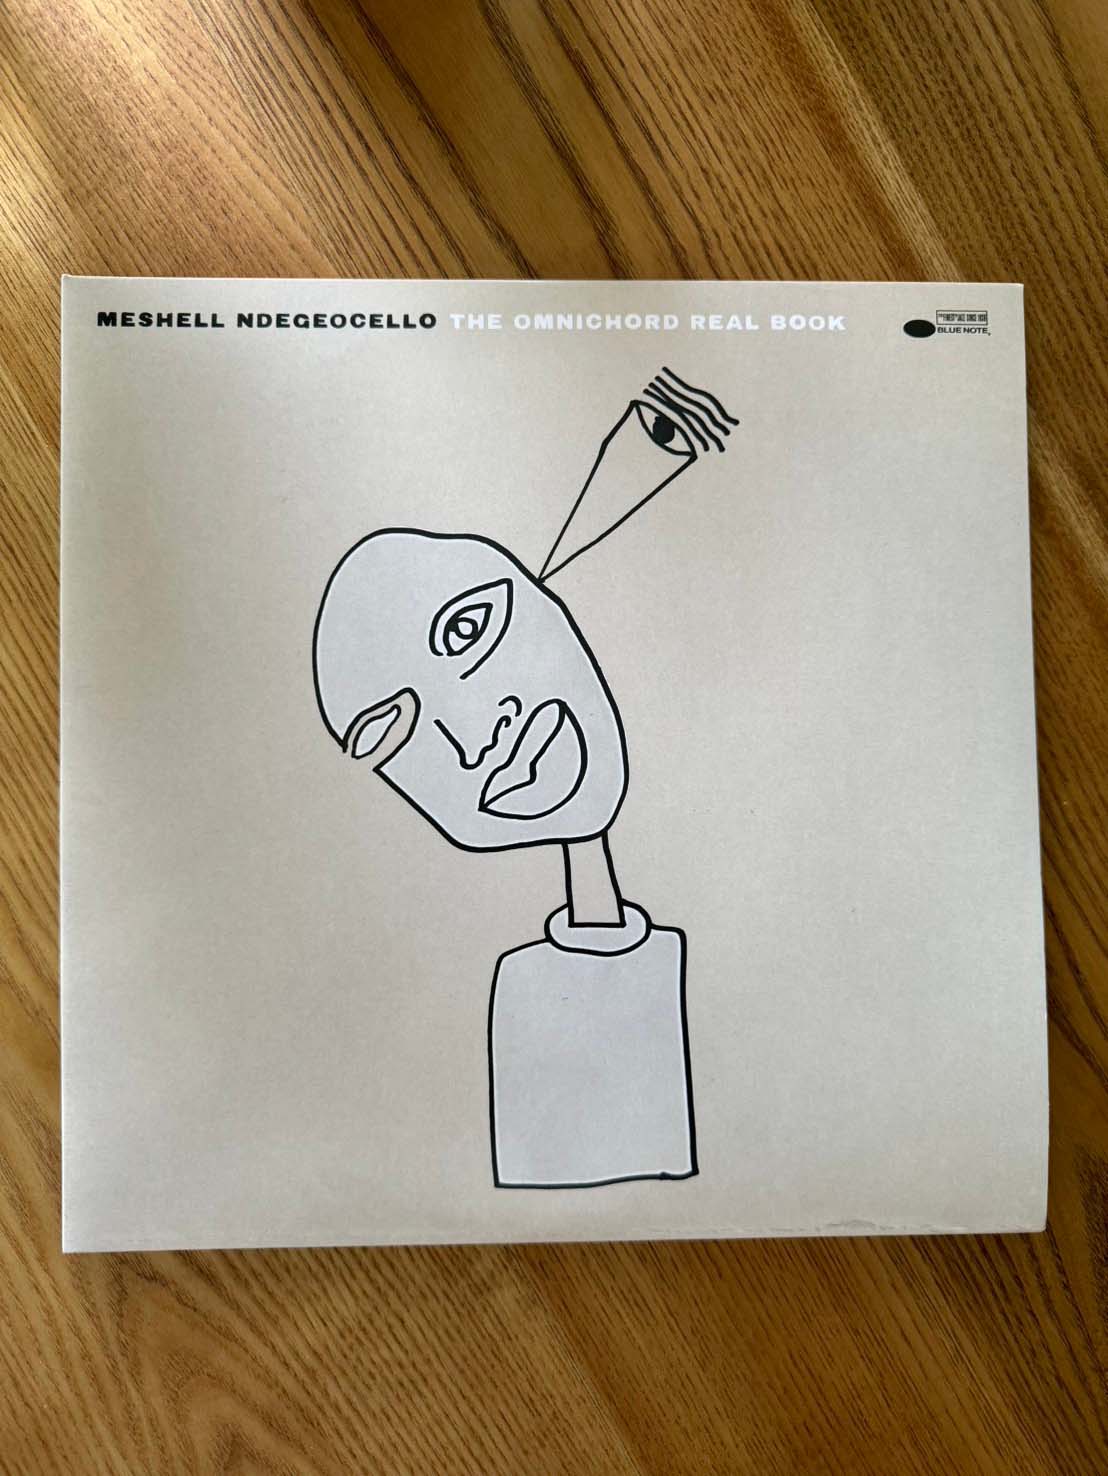 Meshell Ndegeoecello『Omnichord Real Book』